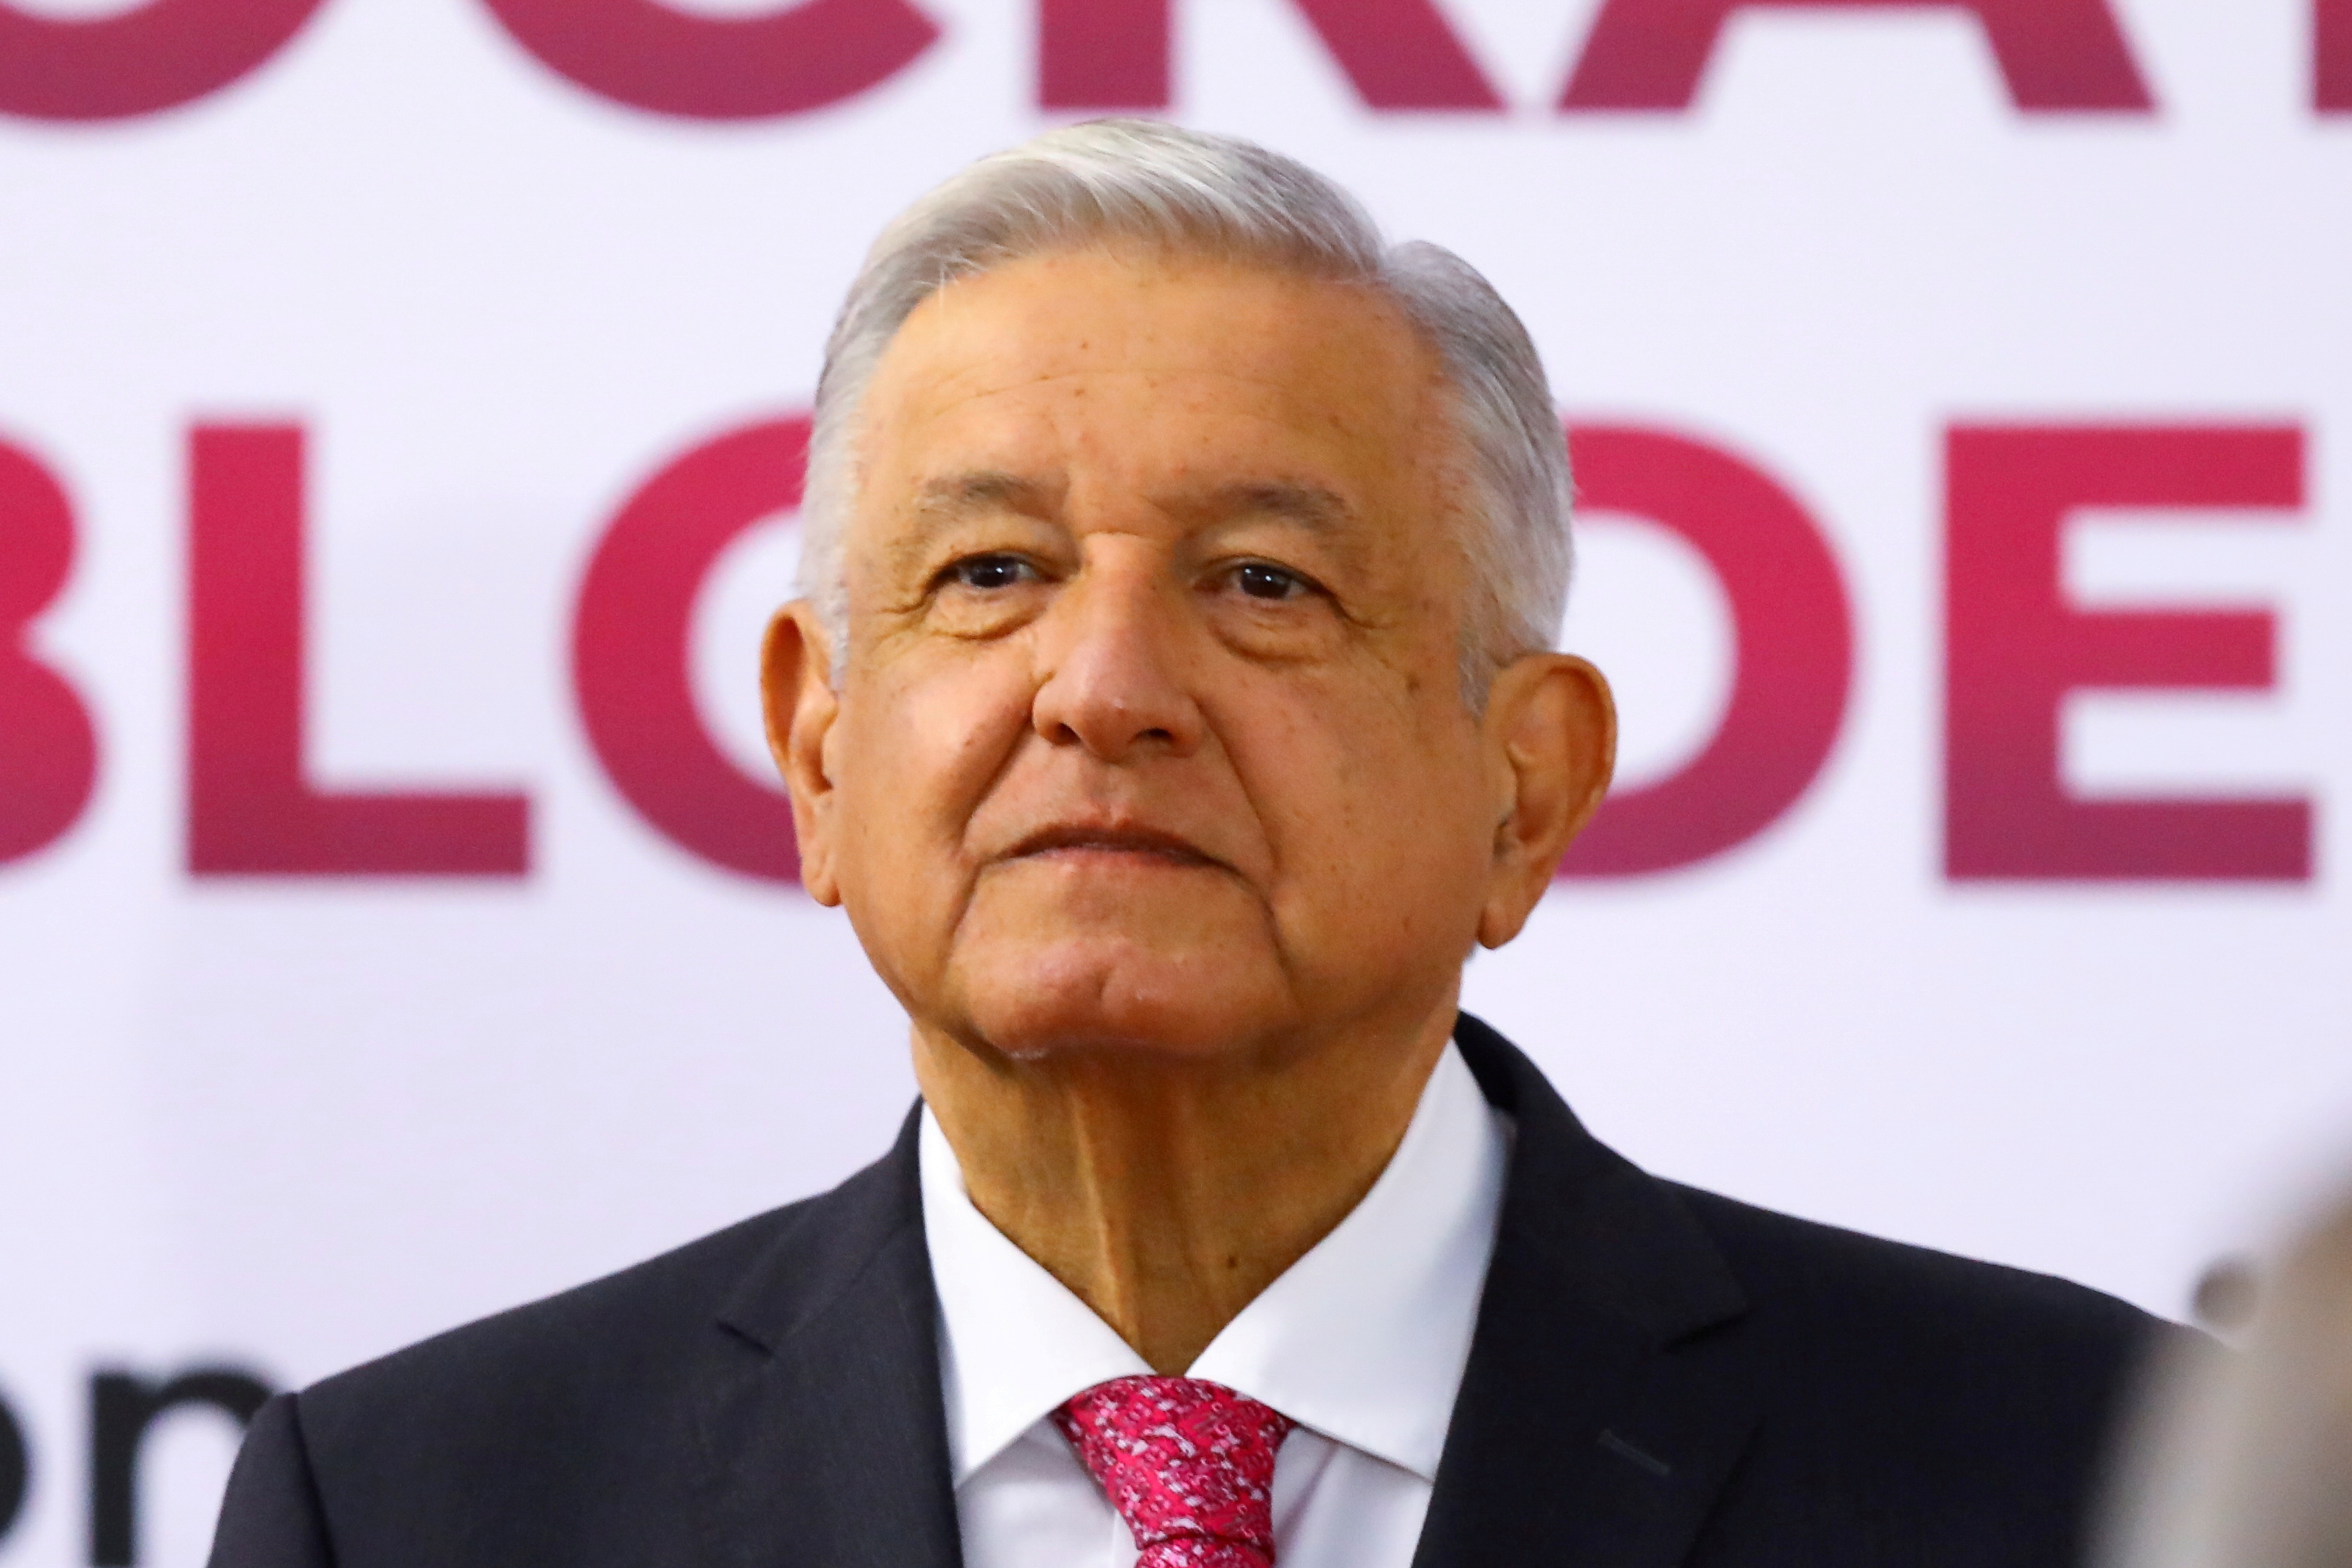 Mexico president backs cenbank hikes over inflation, but slams board ...